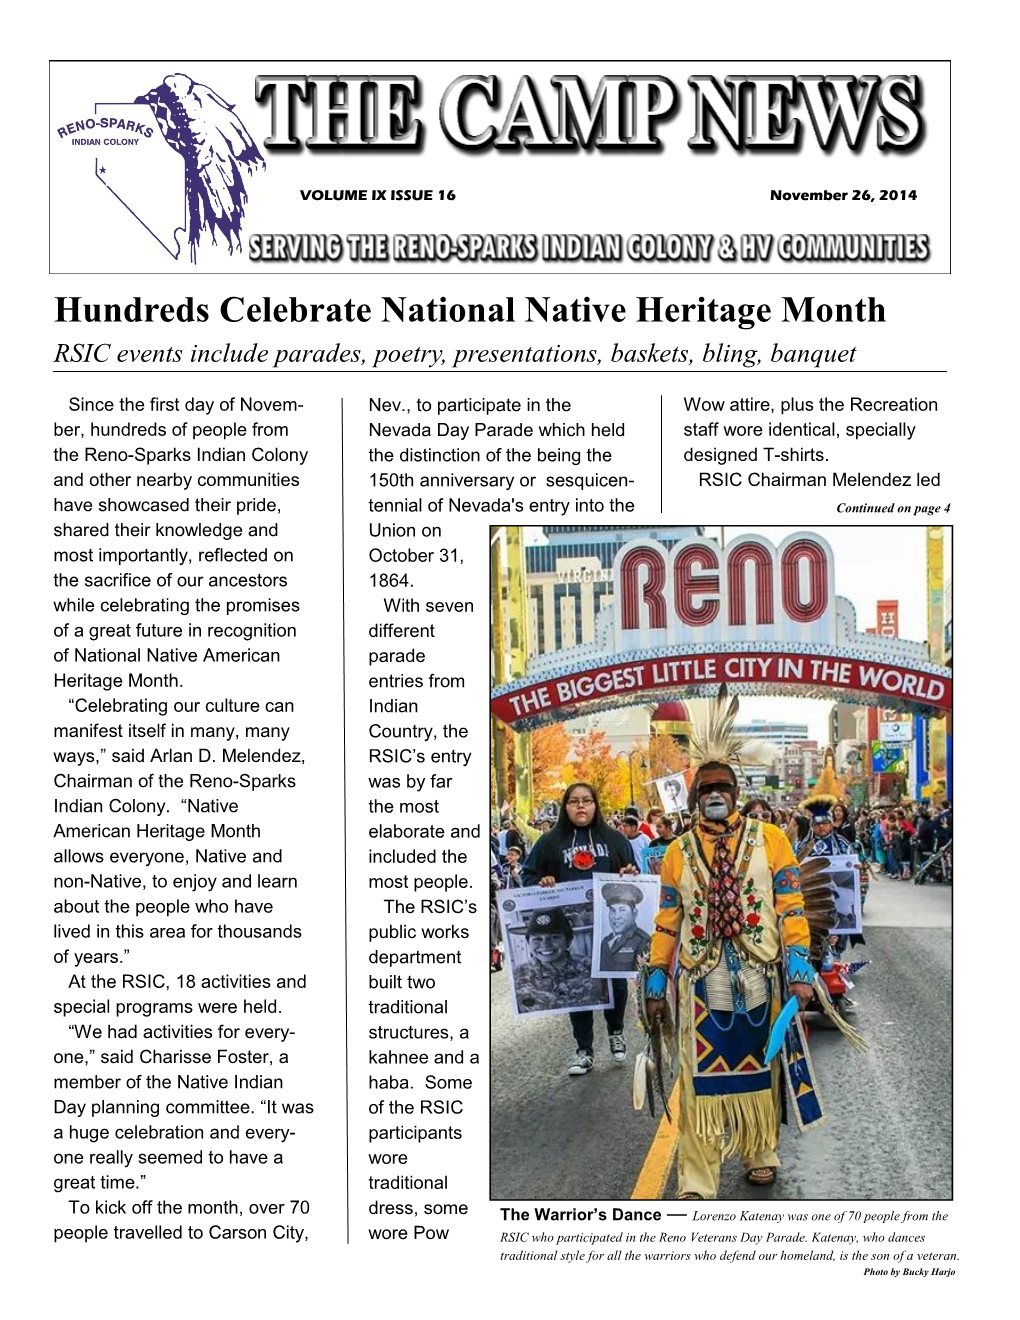 Hundreds Celebrate National Native Heritage Month RSIC Events Include Parades, Poetry, Presentations, Baskets, Bling, Banquet